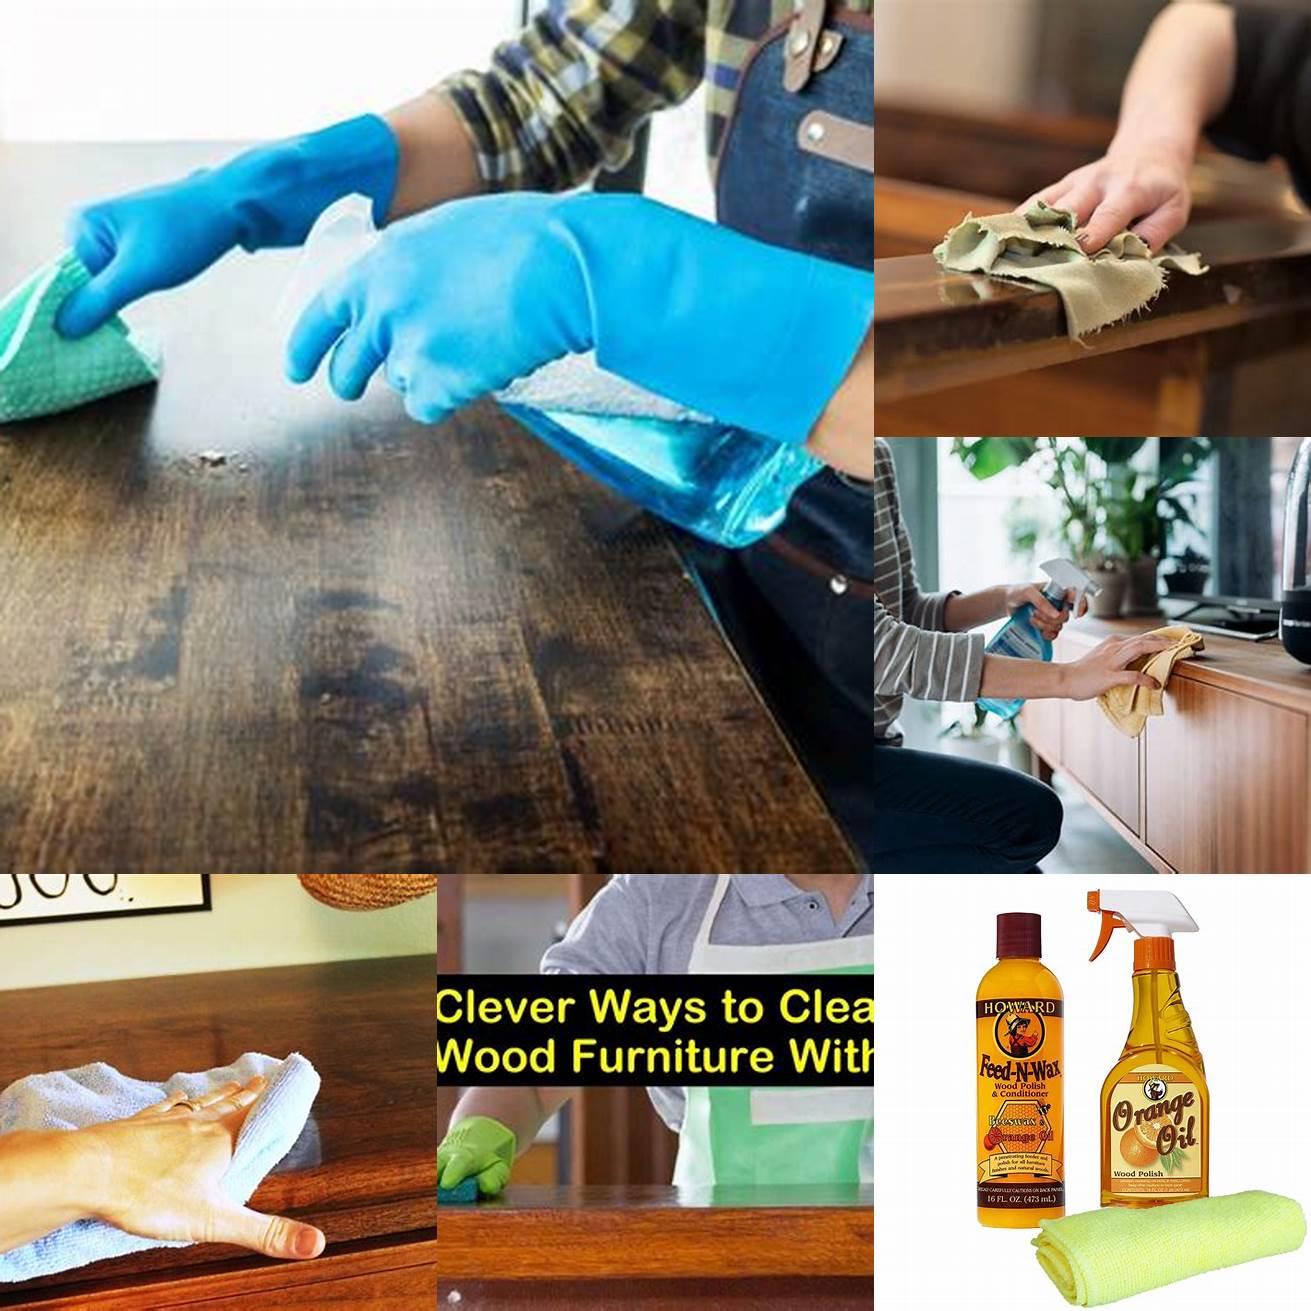 Using a wood cleaner or conditioner